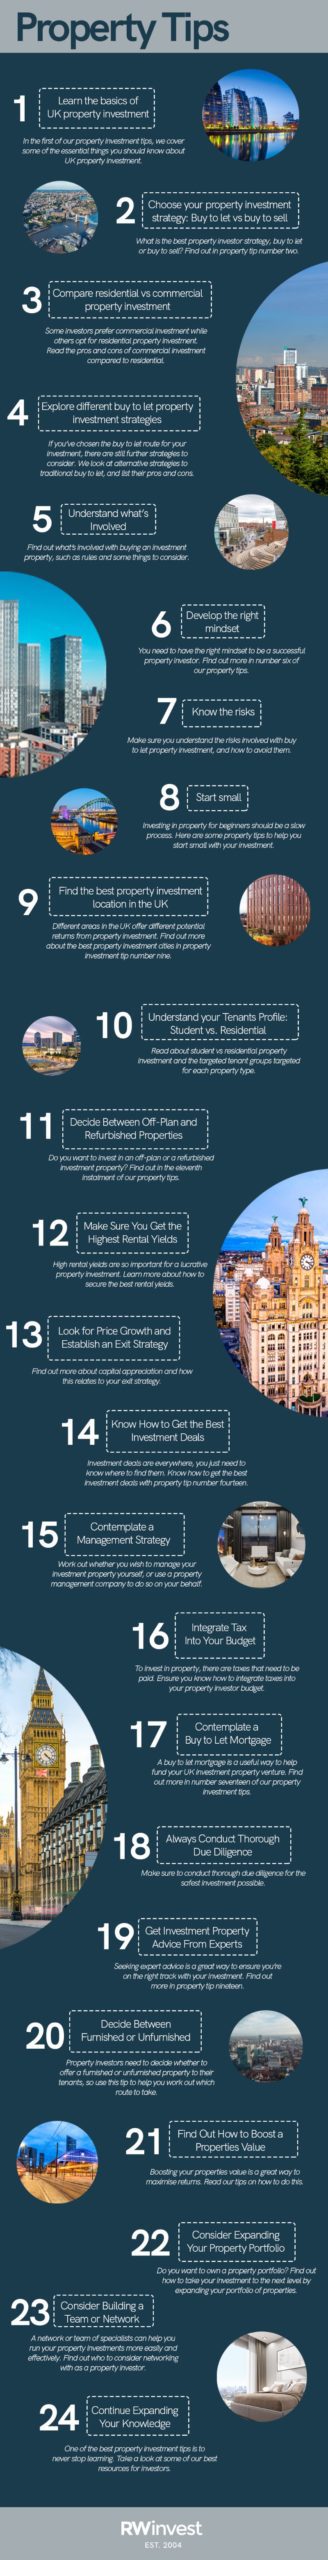 Property Investment Tips Checklist infographic